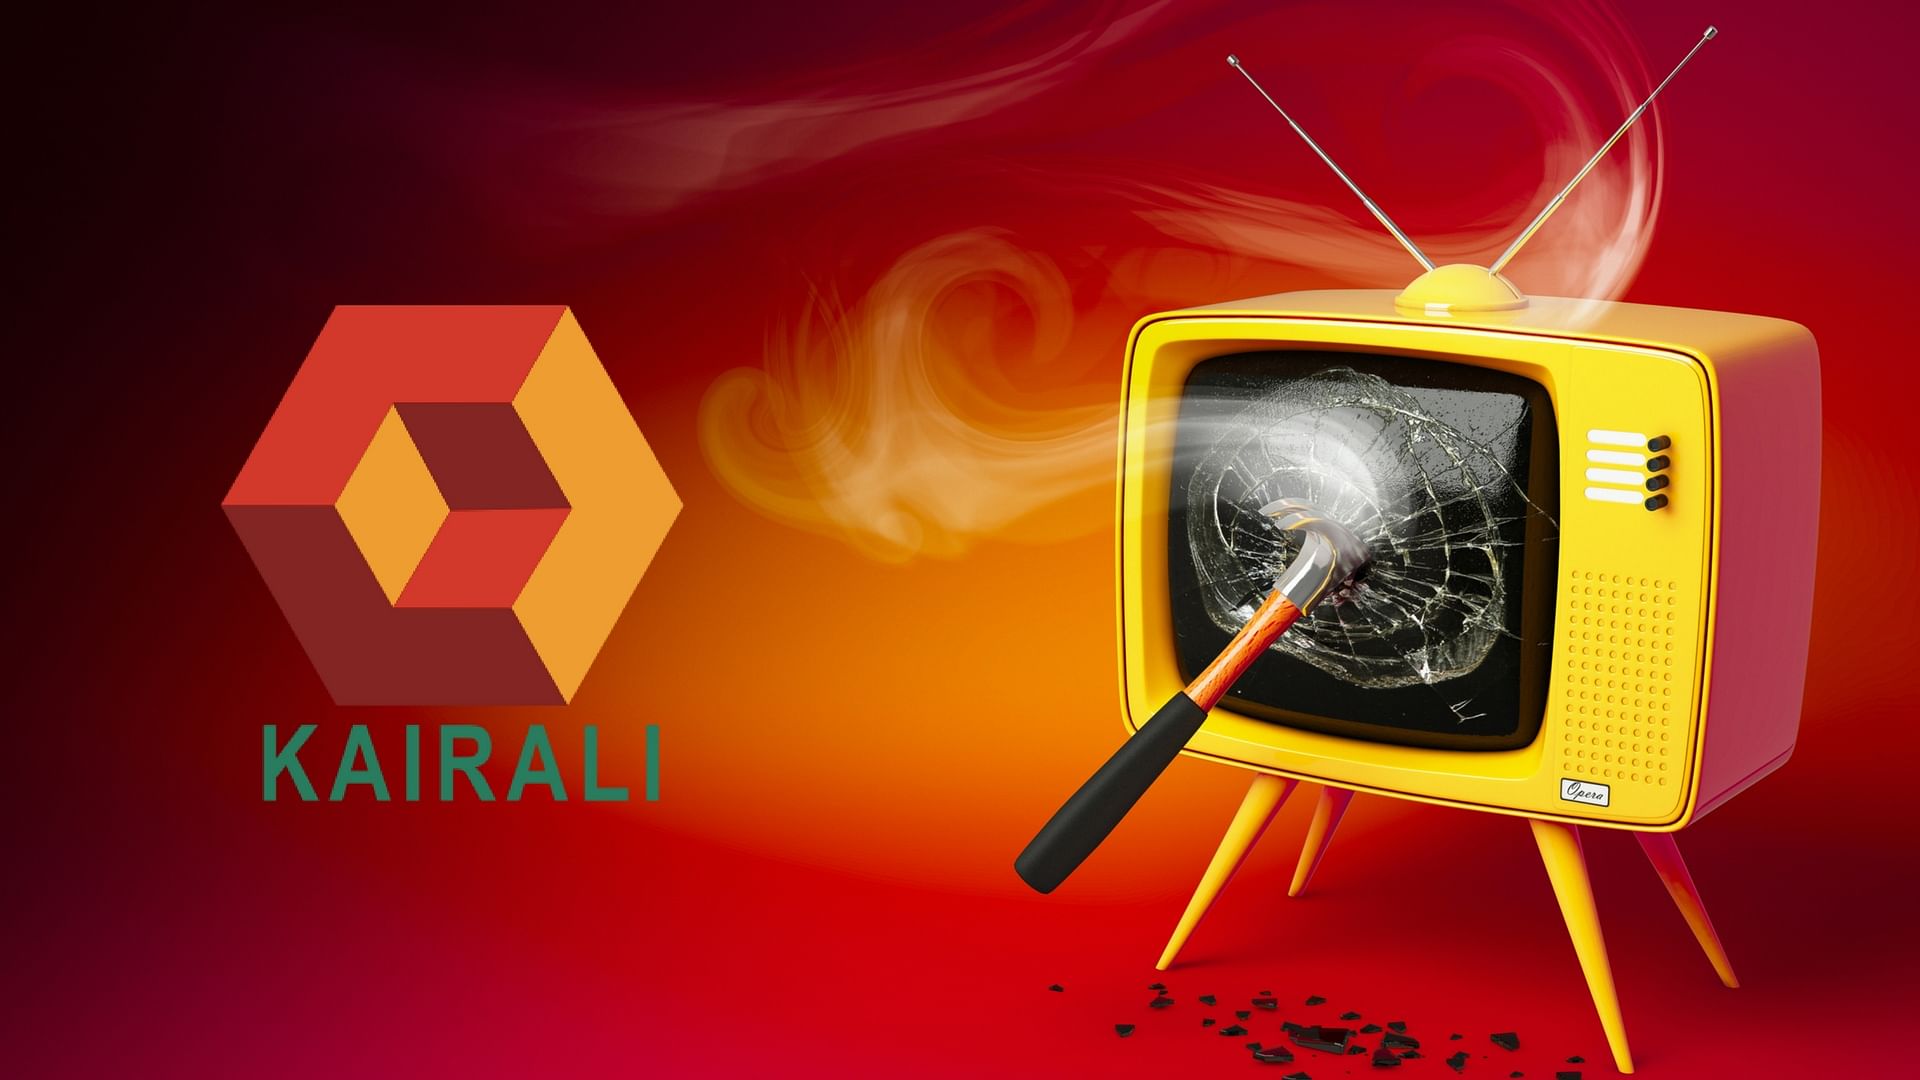 Kairali TV angered a large section of it’s viewers with it’s coverage (Photo: The Quint)